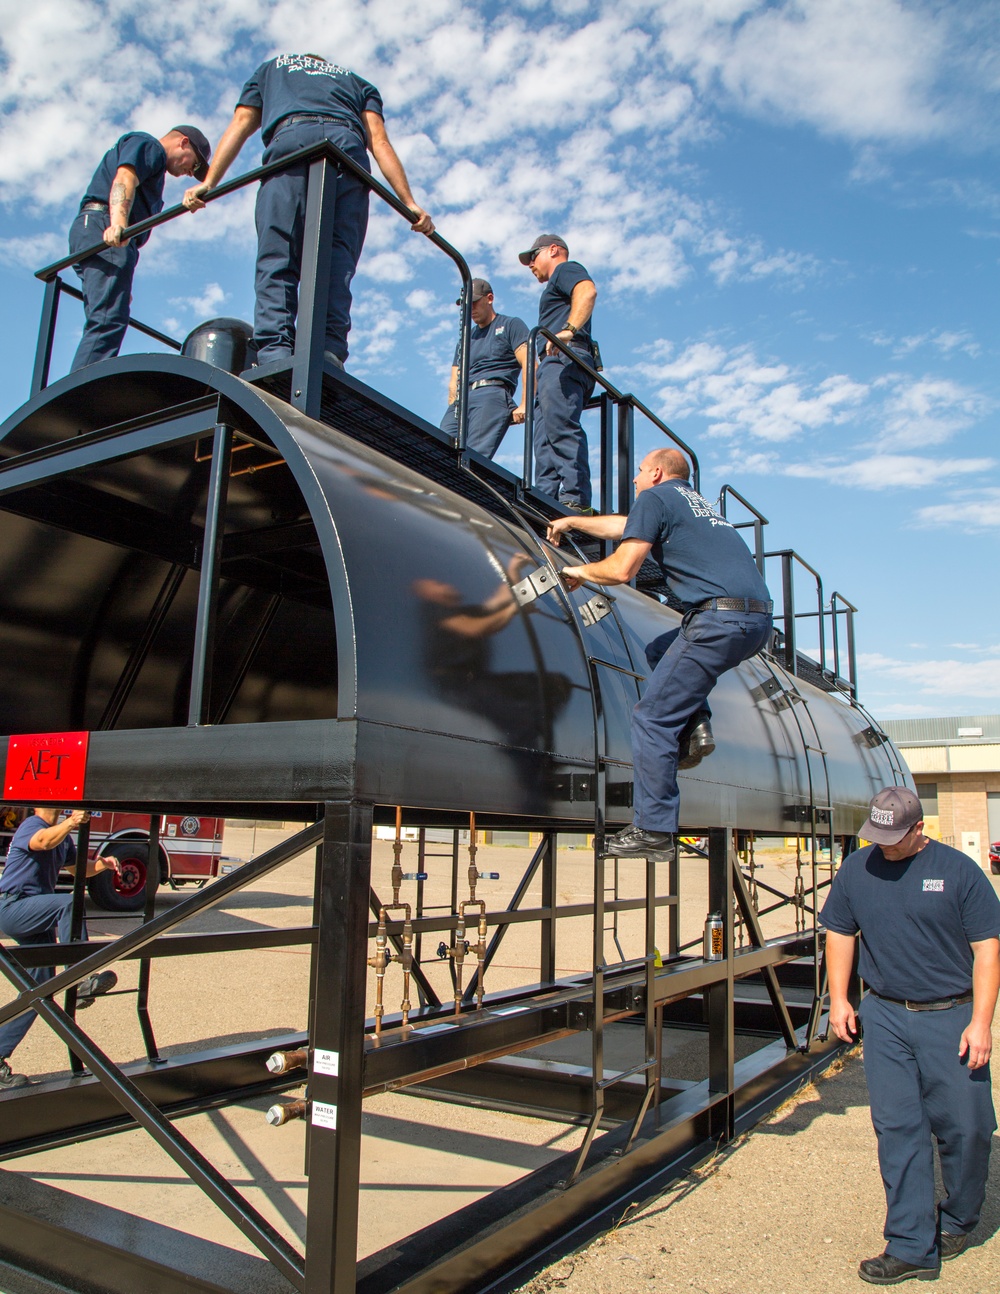 MCLB Barstow Fire train with new three-domed railcar simulator